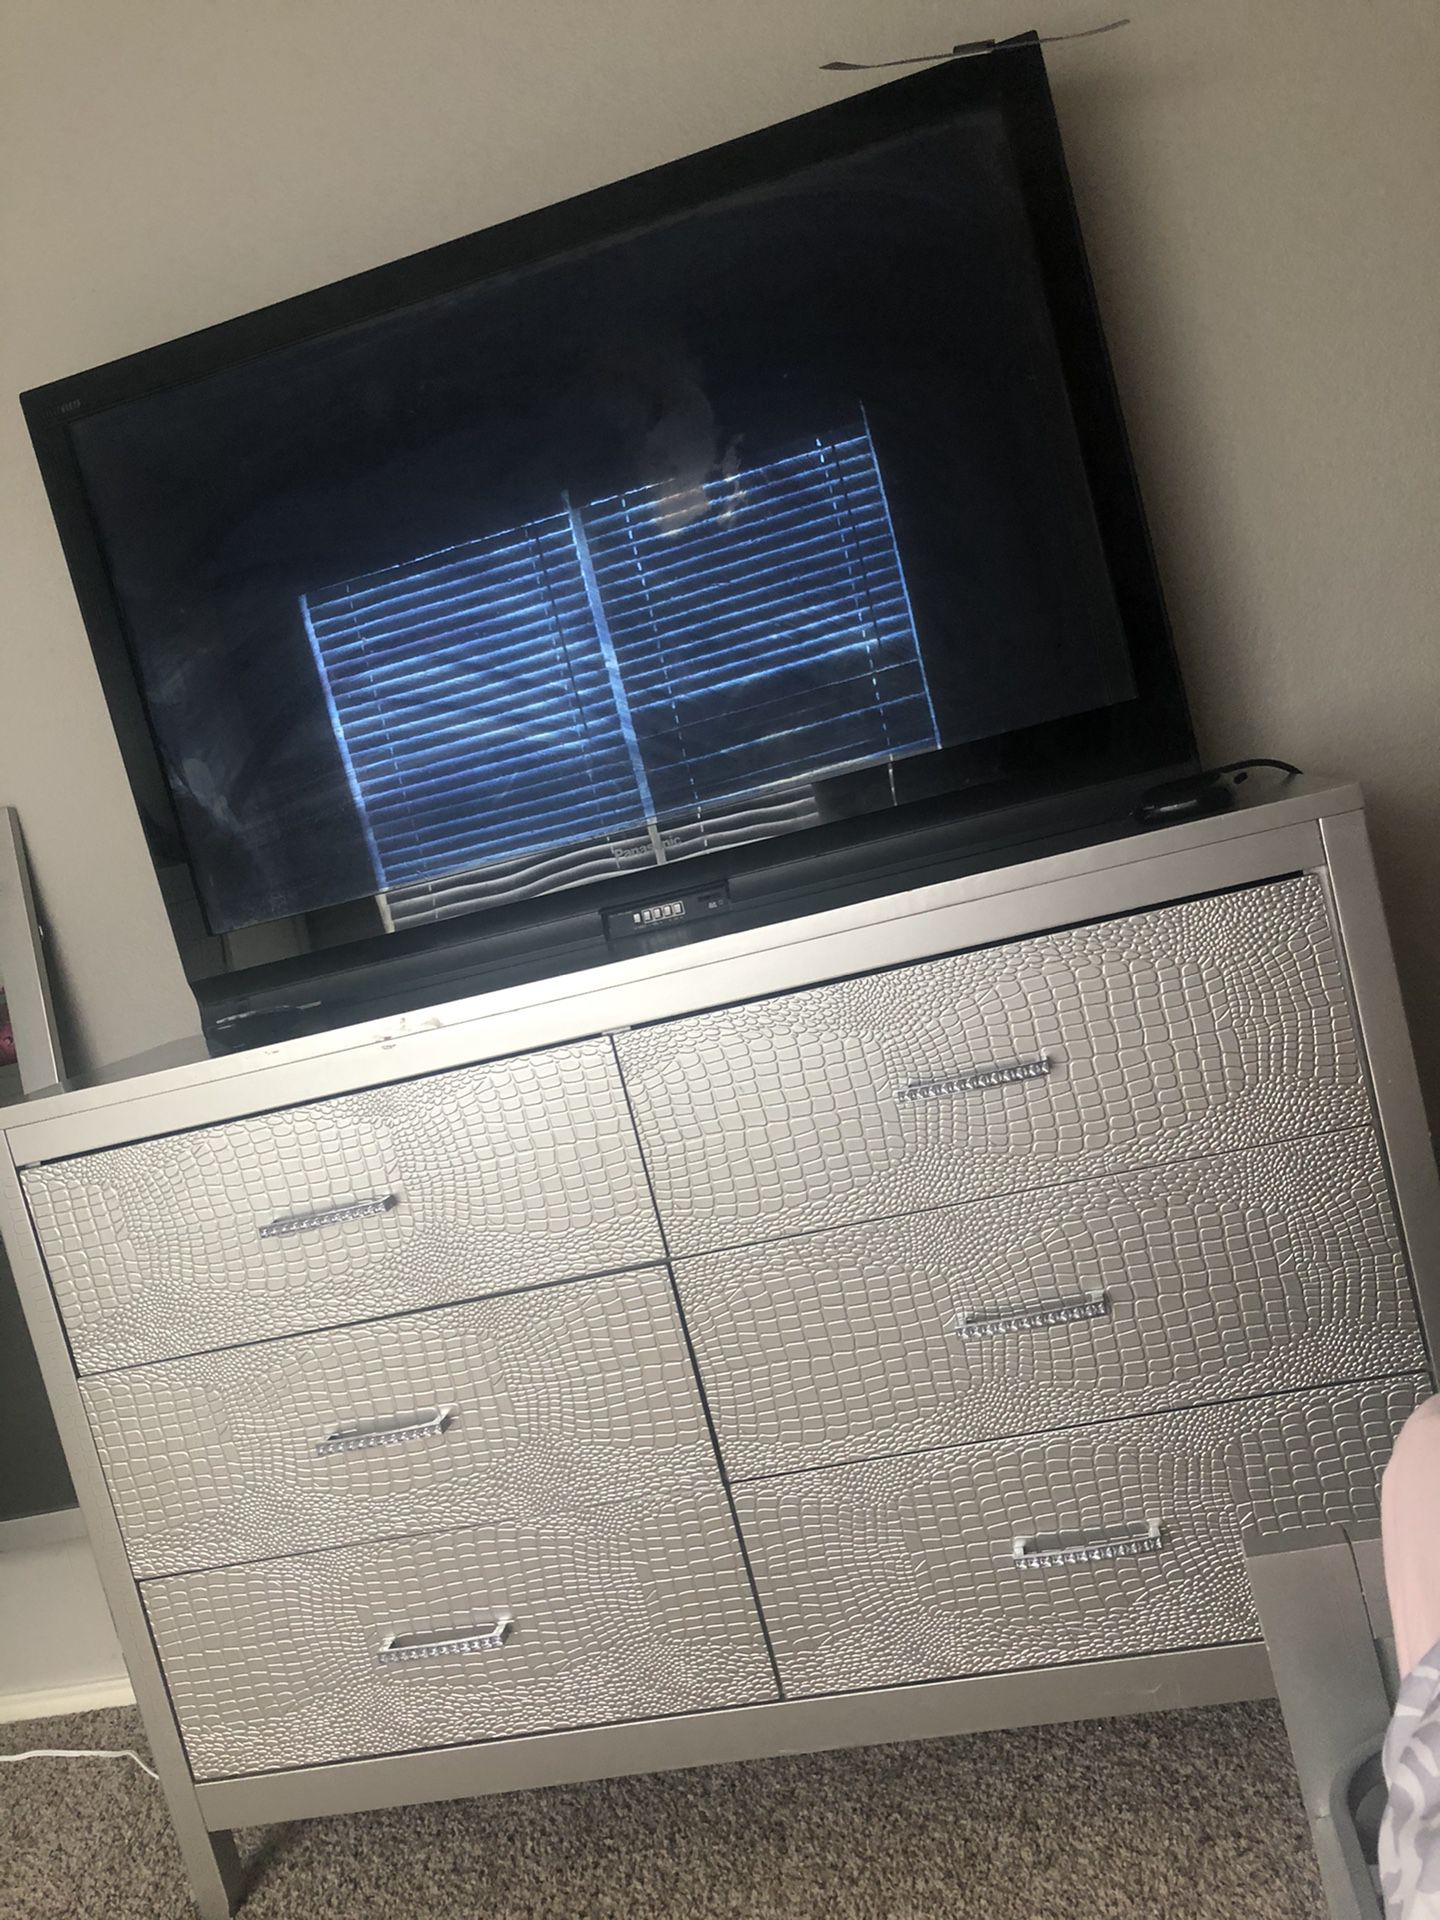 55 Inch Parasonic Tv For Sale